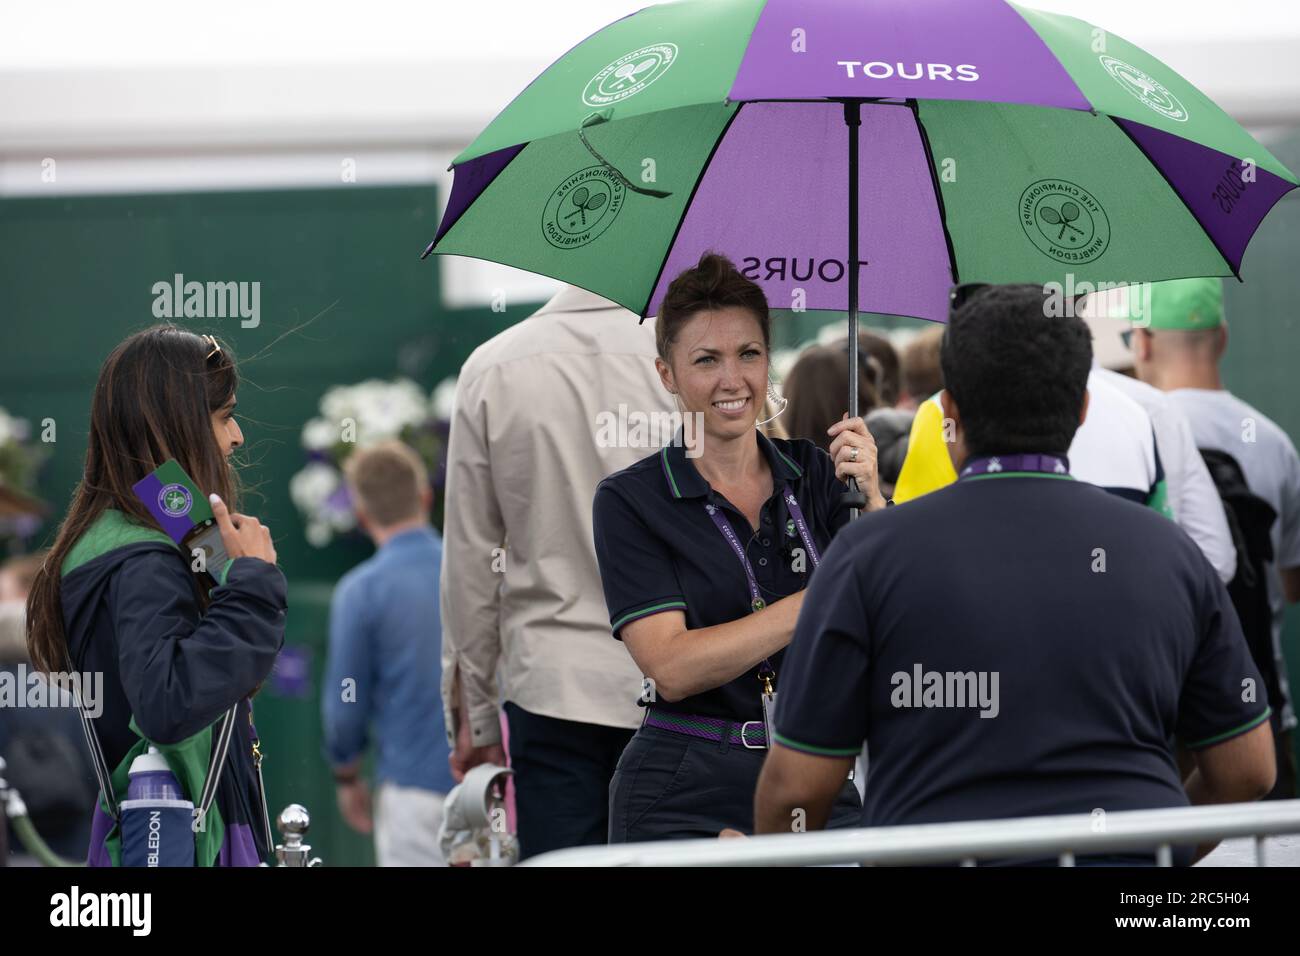 London, UK. 13th July, 2023. large queues amid tight security at the All England Lawn Tennis Club, Wimbledon during the tennis. Credit: Ian Davidson/Alamy Live News Stock Photo